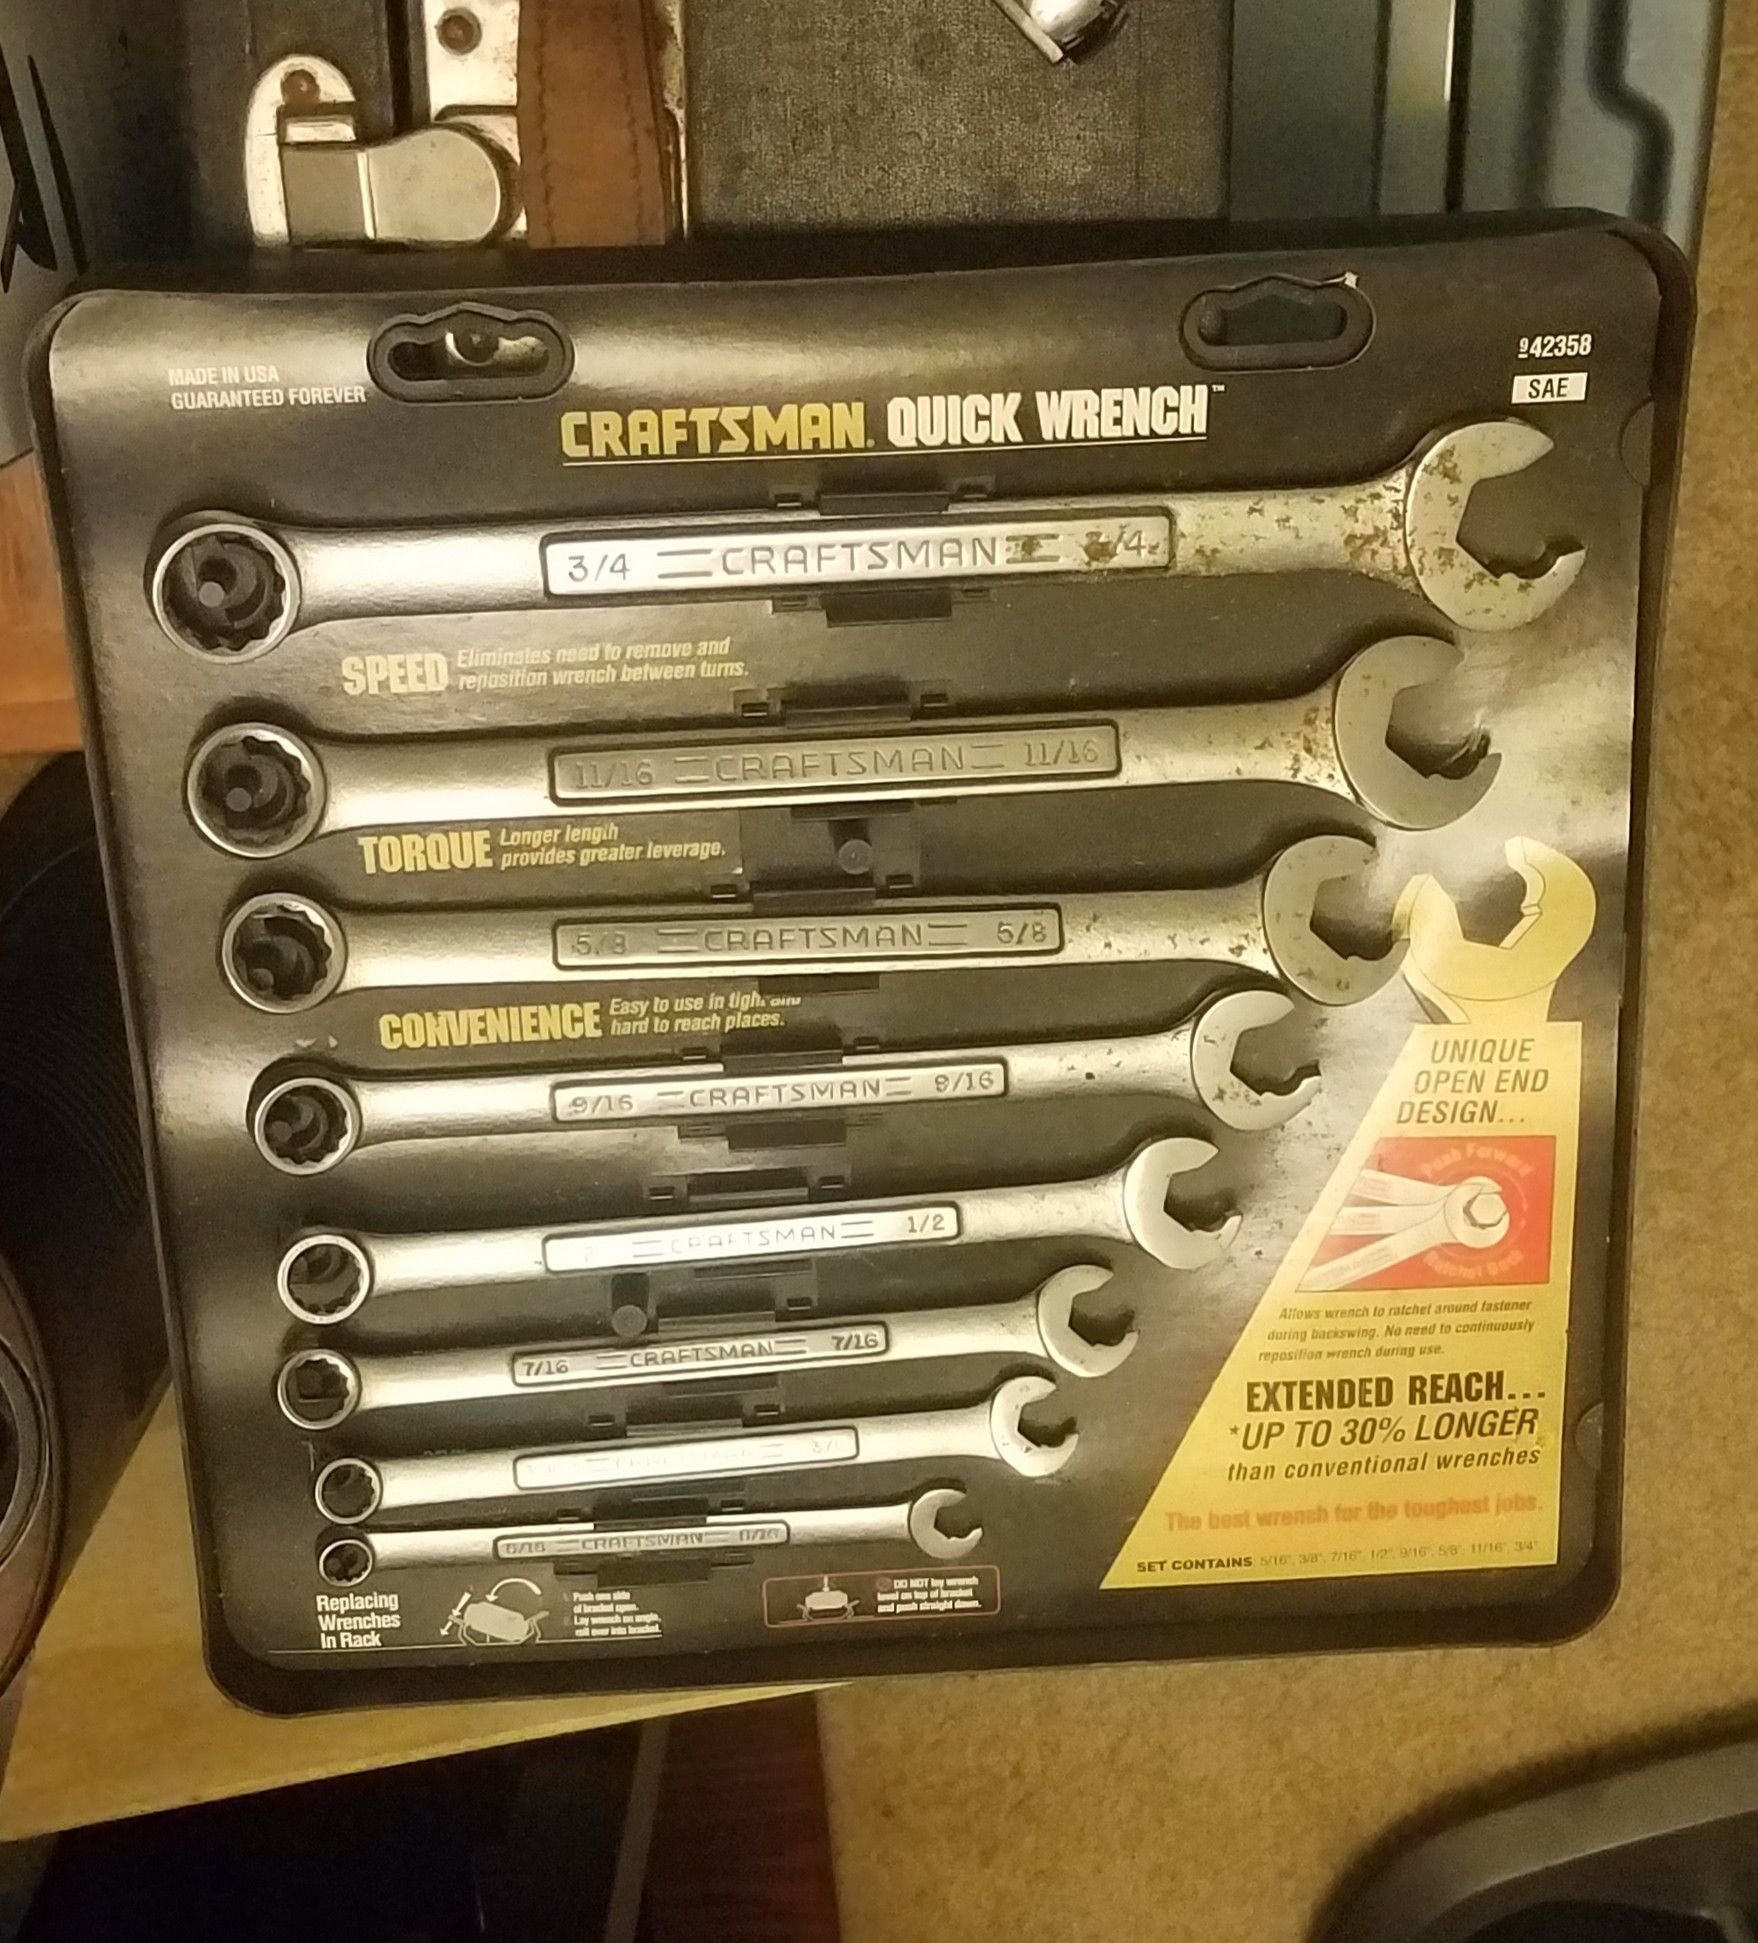 Craftsman quick wrenches